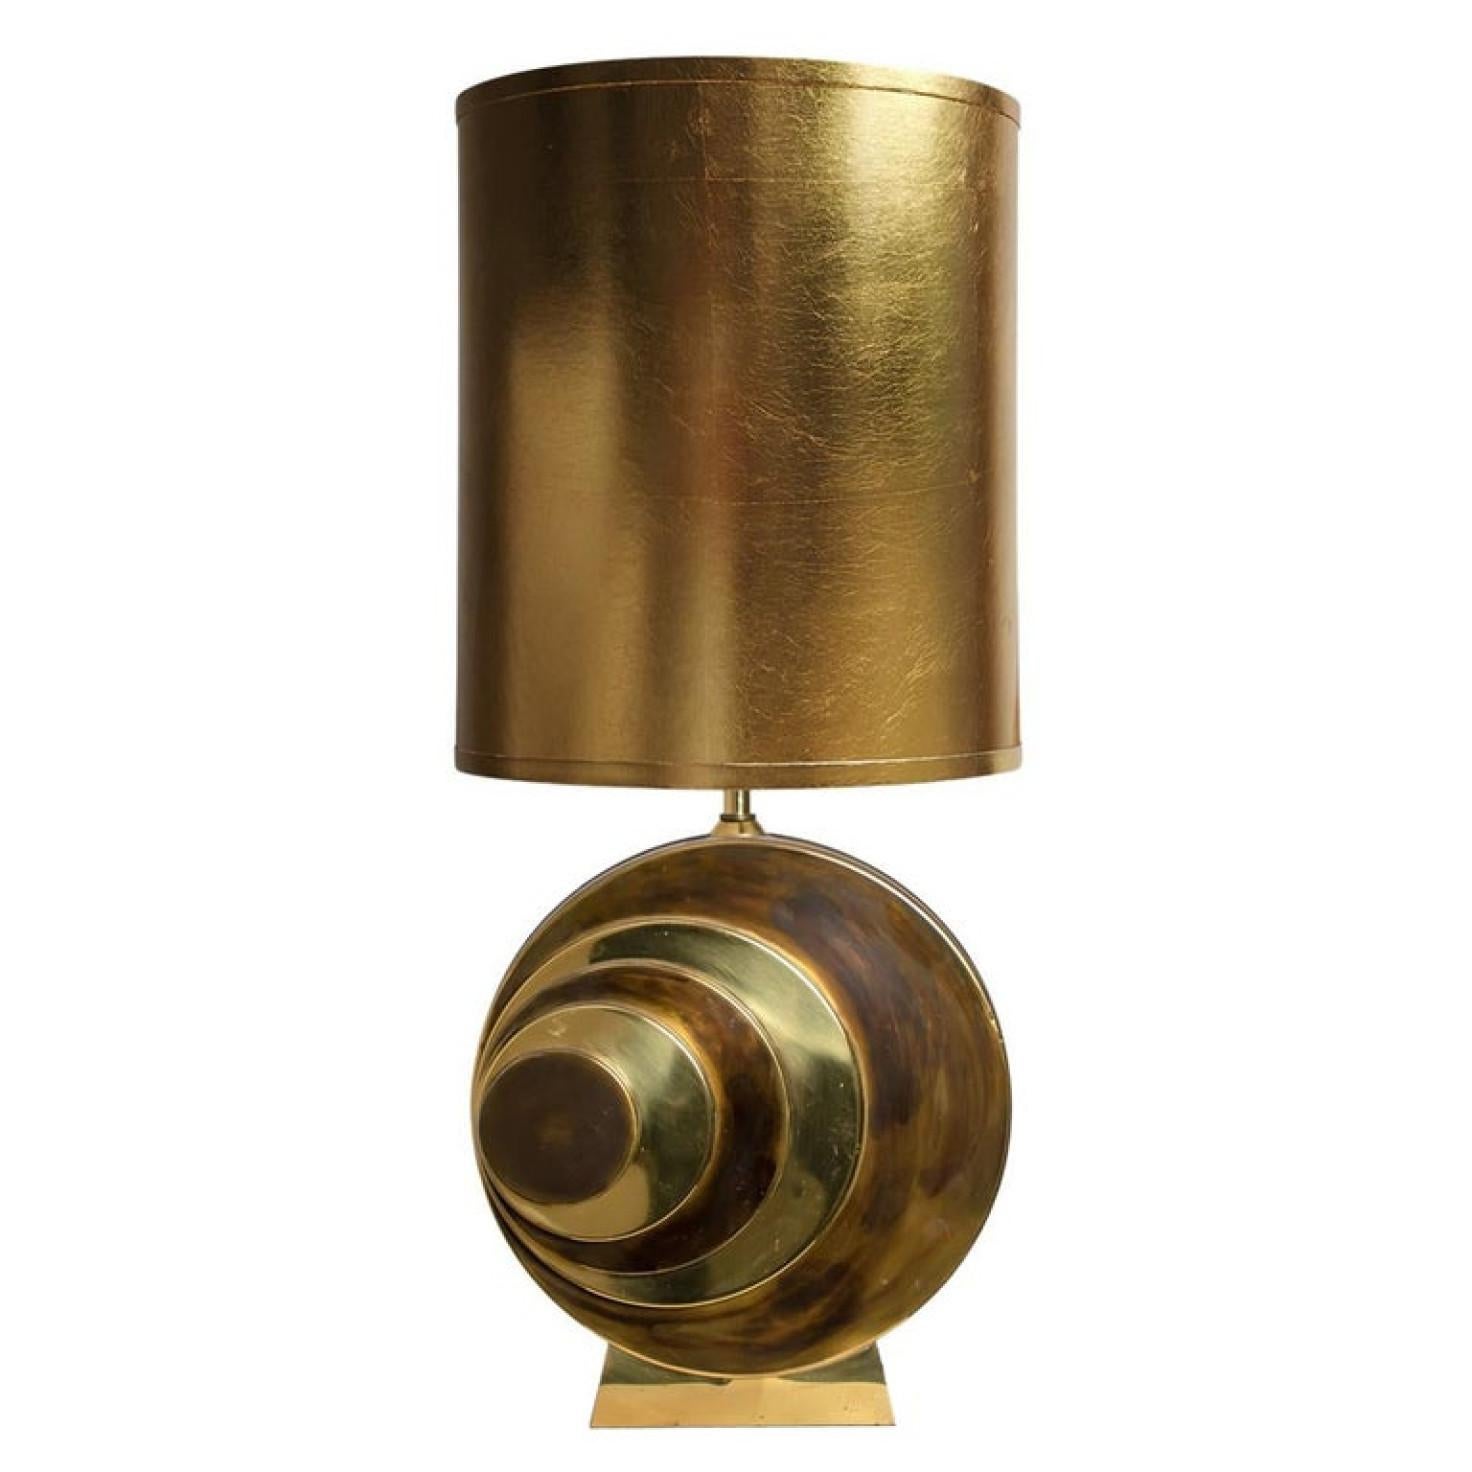 Unique brass design table lamp from the 1960s. With wonderful new custom made shade by Rene Houben

Dimensions Depth: 5.11 (13 cm) width: 15.7